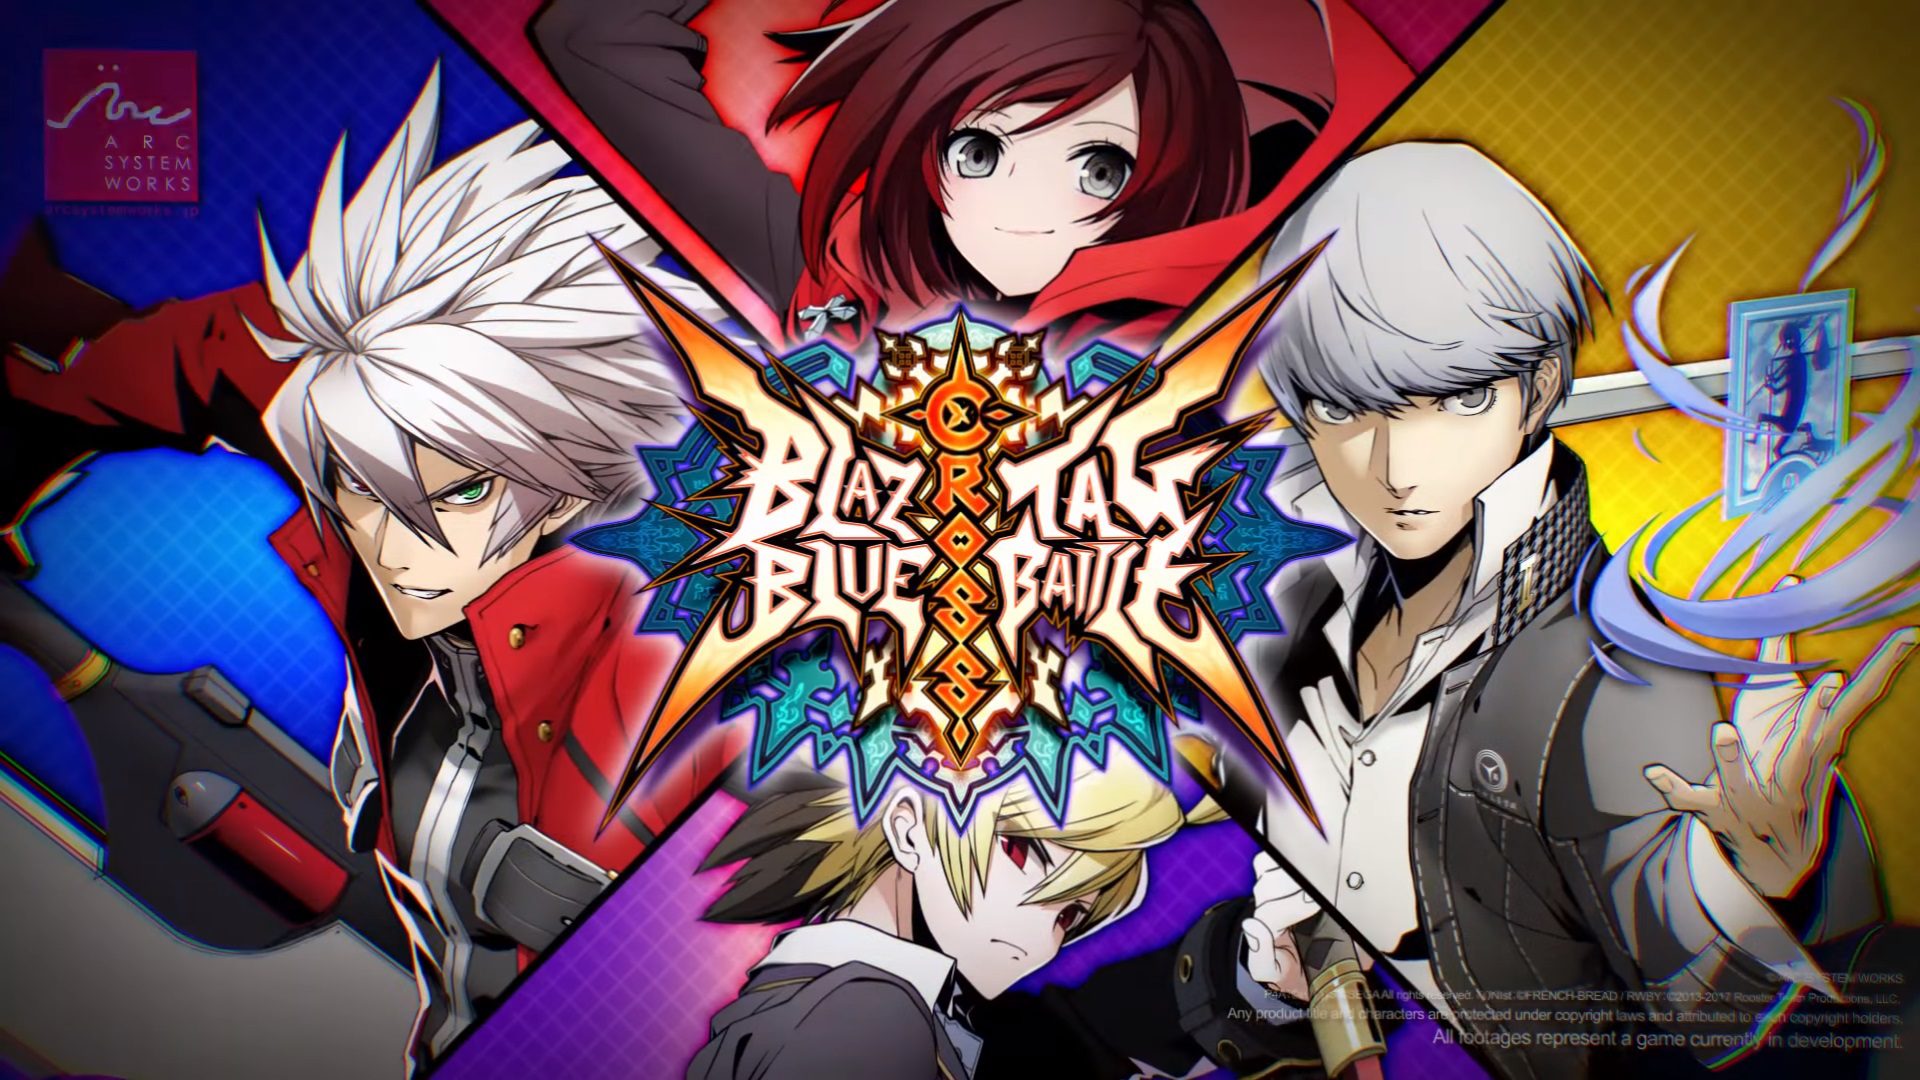 Can’t escape from crossing fate as BlazBlue: Cross Tag Battle launches